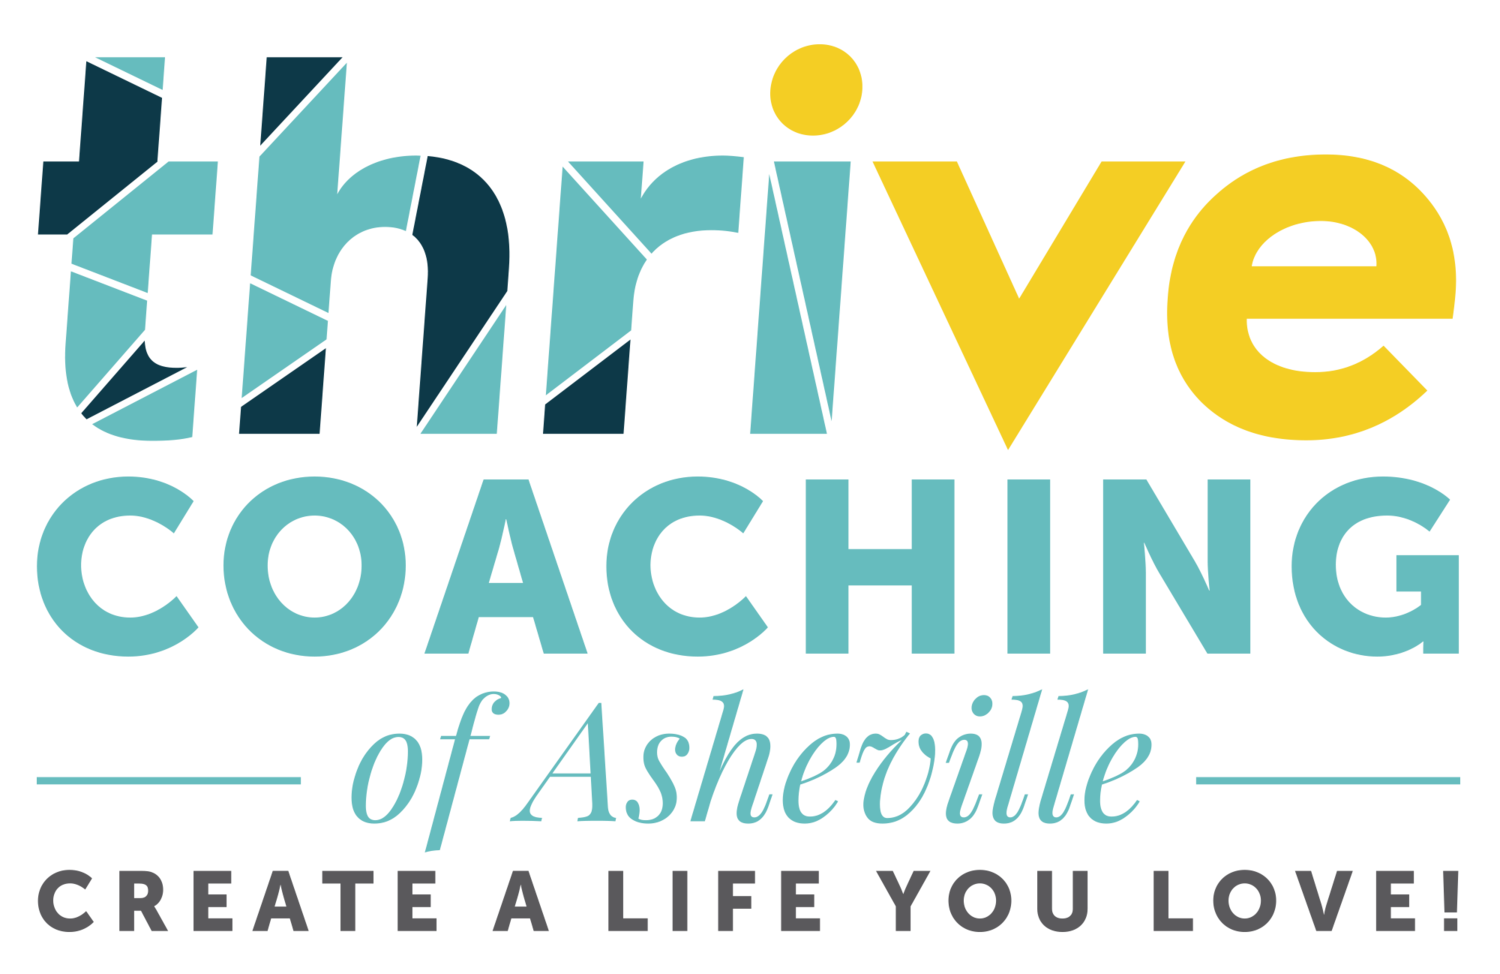 THRIVE COACHING of Asheville